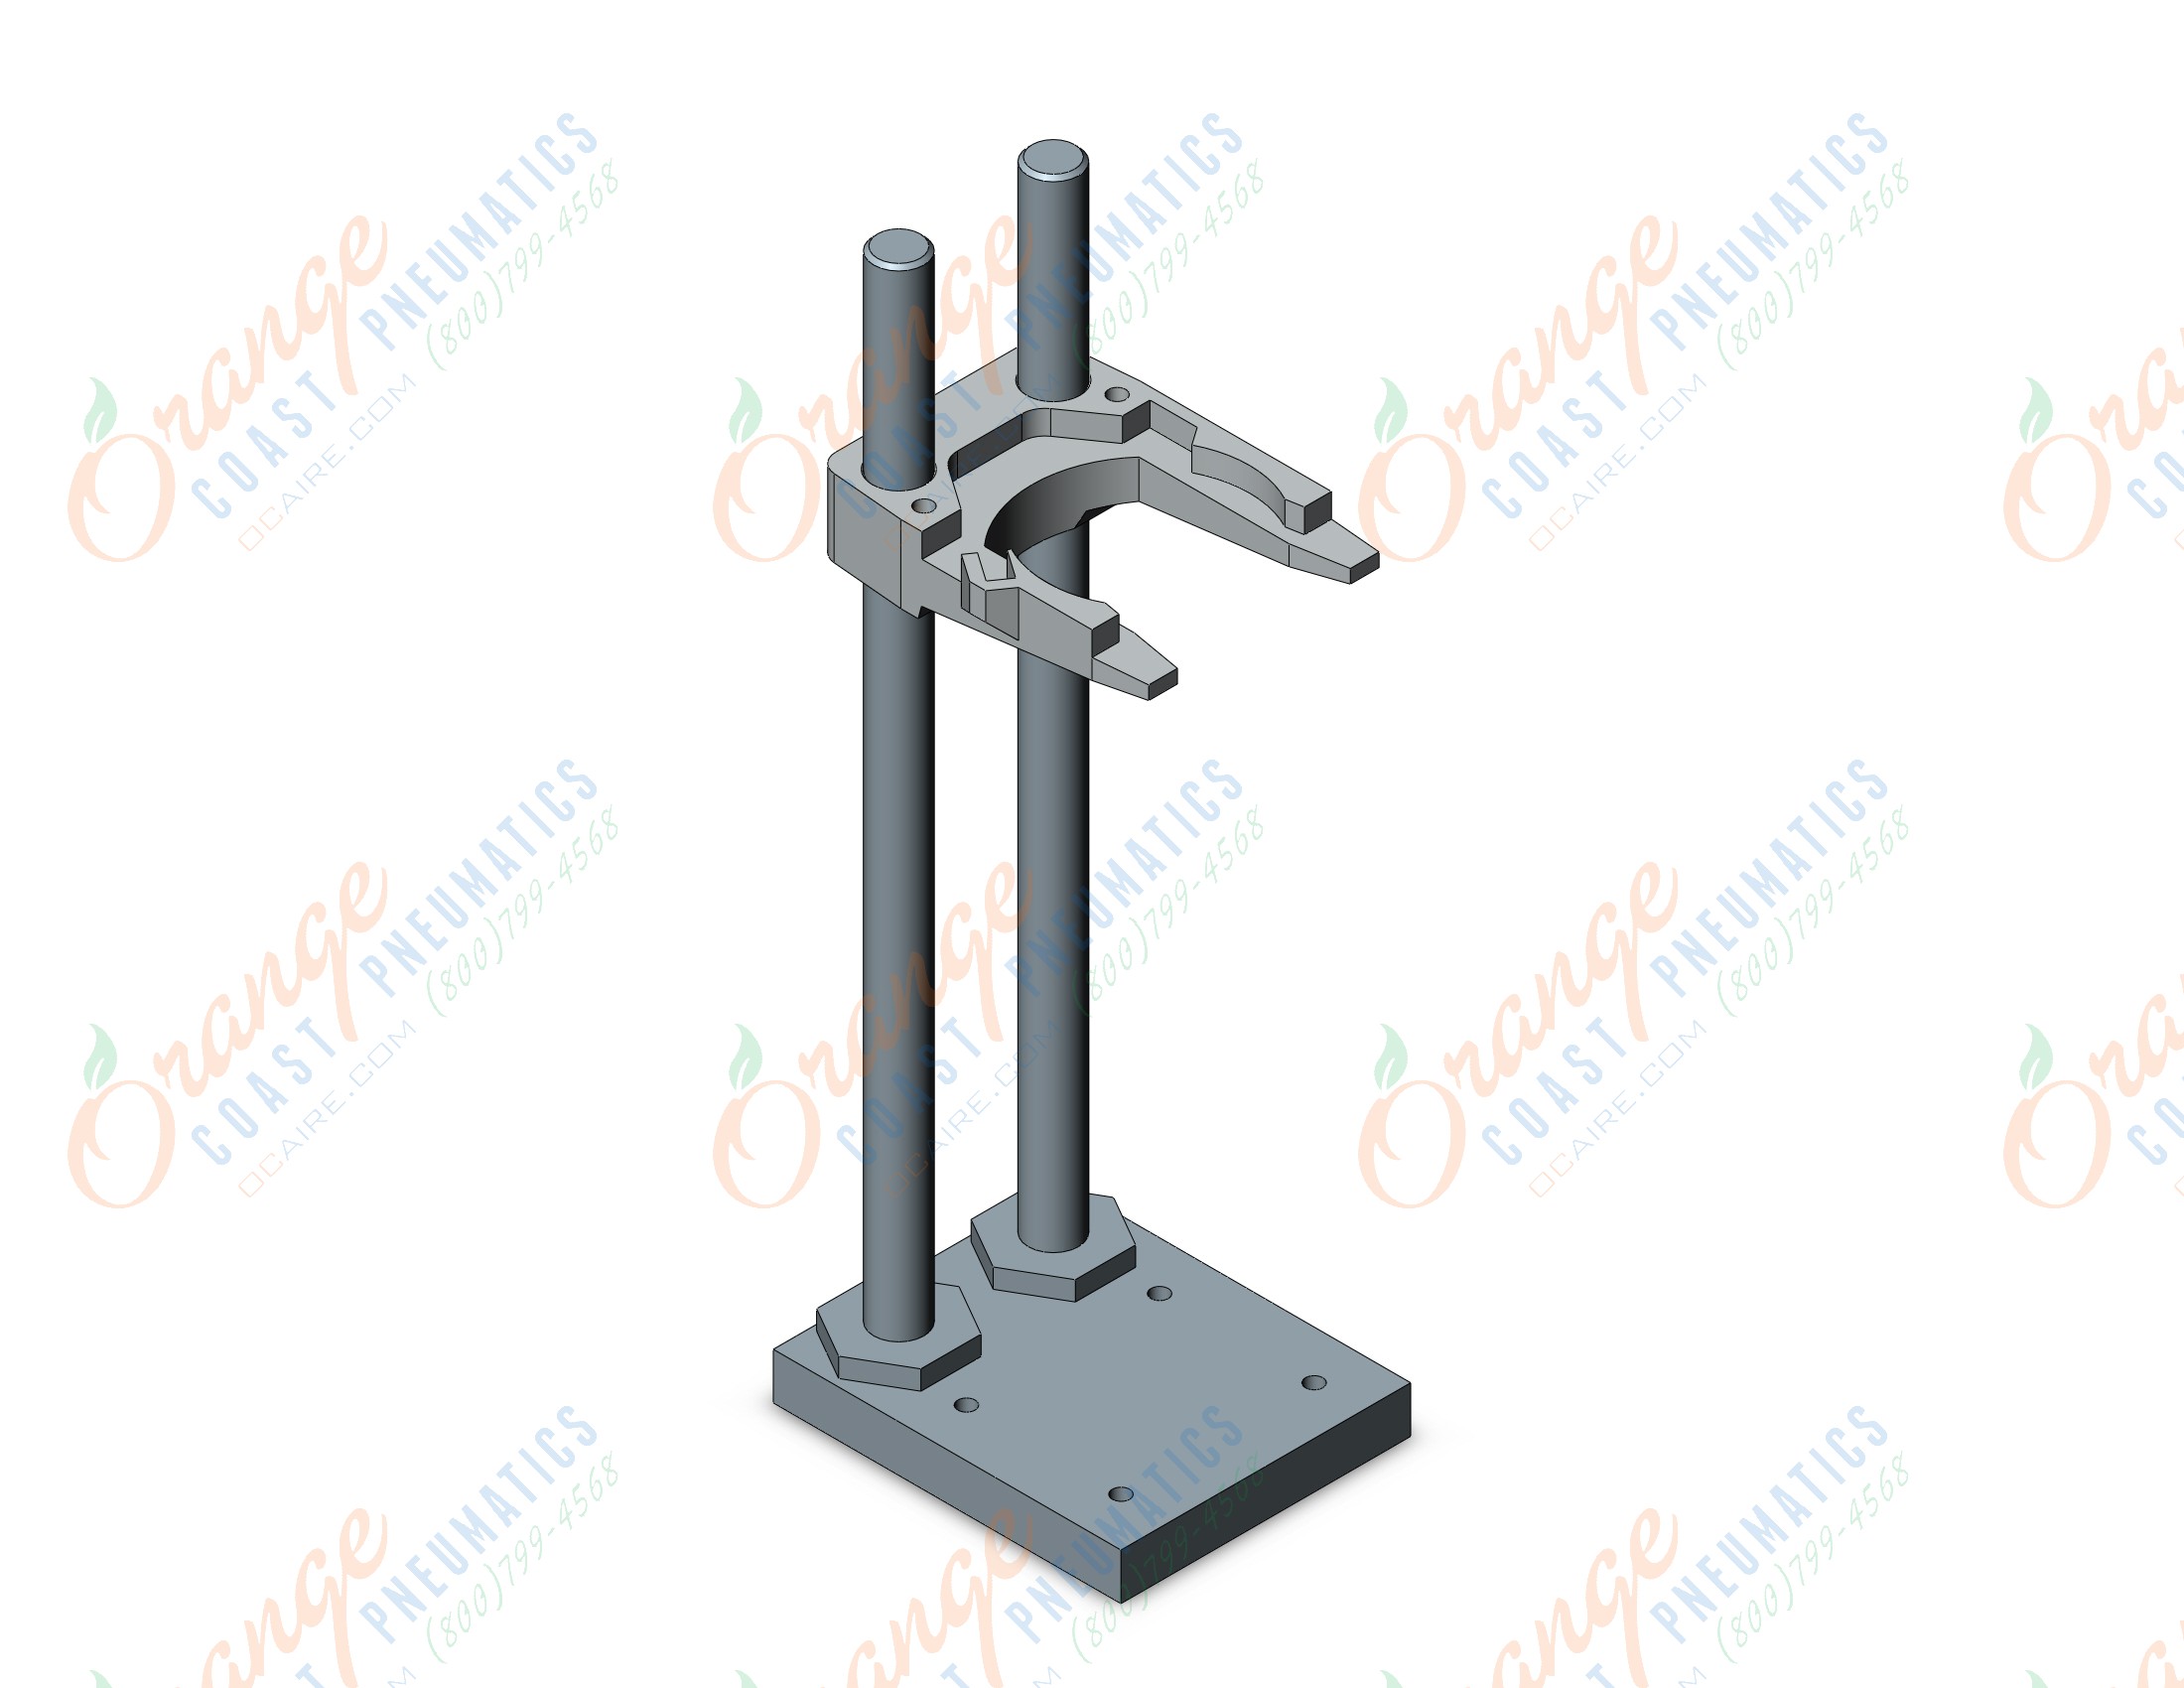 SMC MA210-S1 auto hand changer, MA GRIPPERS